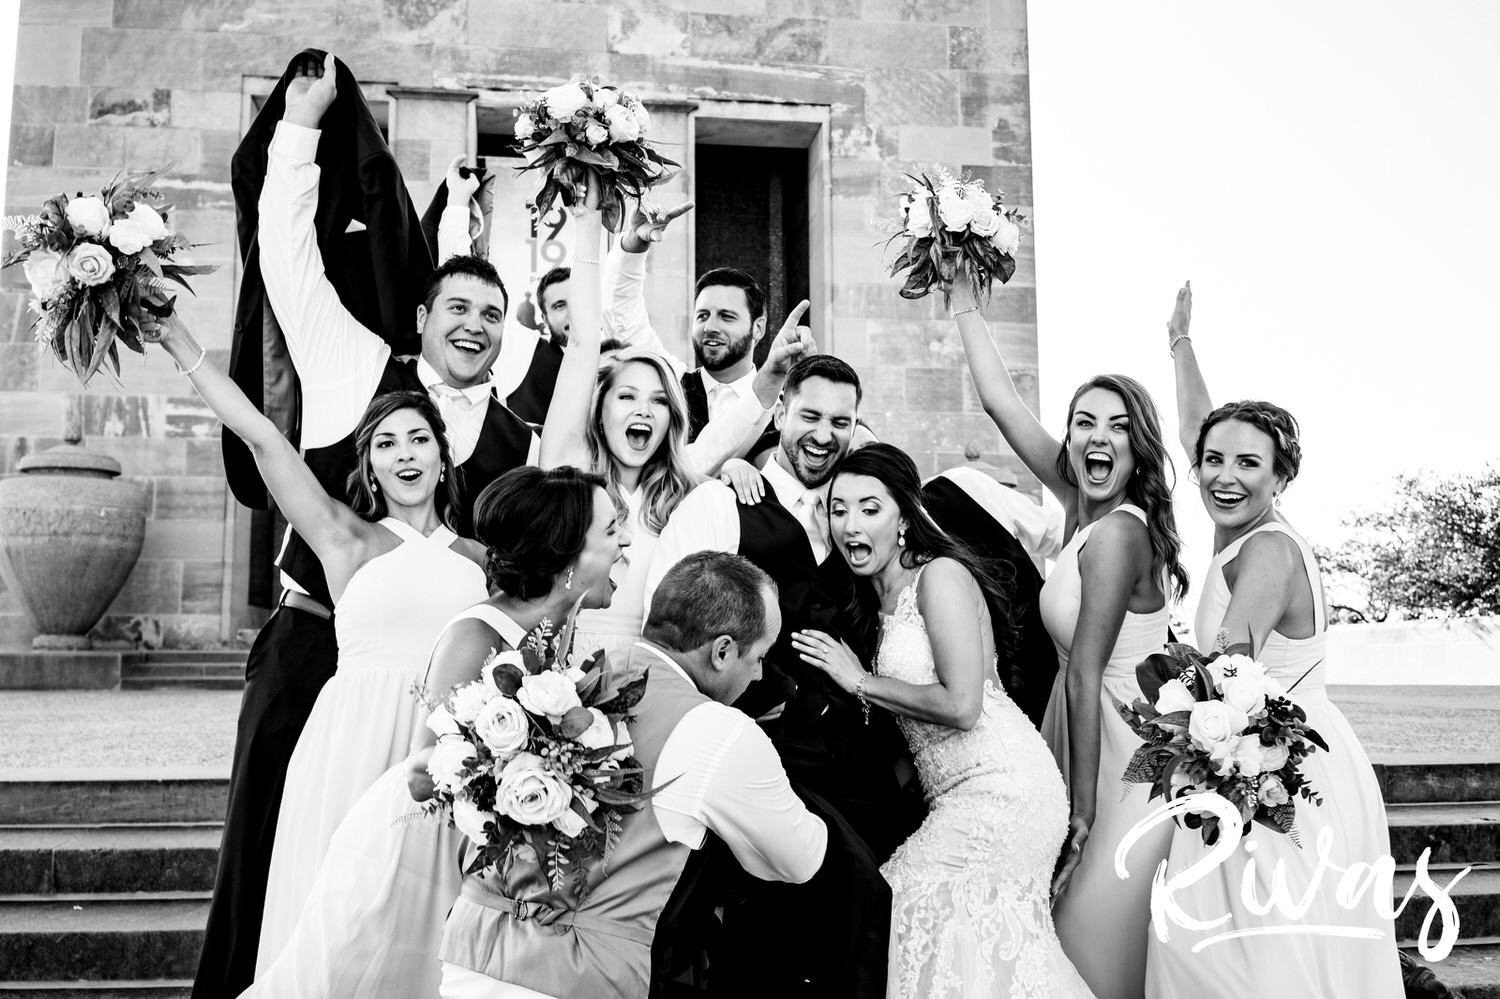 A candid, black and white picture of a wedding party lifting a bride into their air in celebration on a wedding day in downtown Kansas City. 